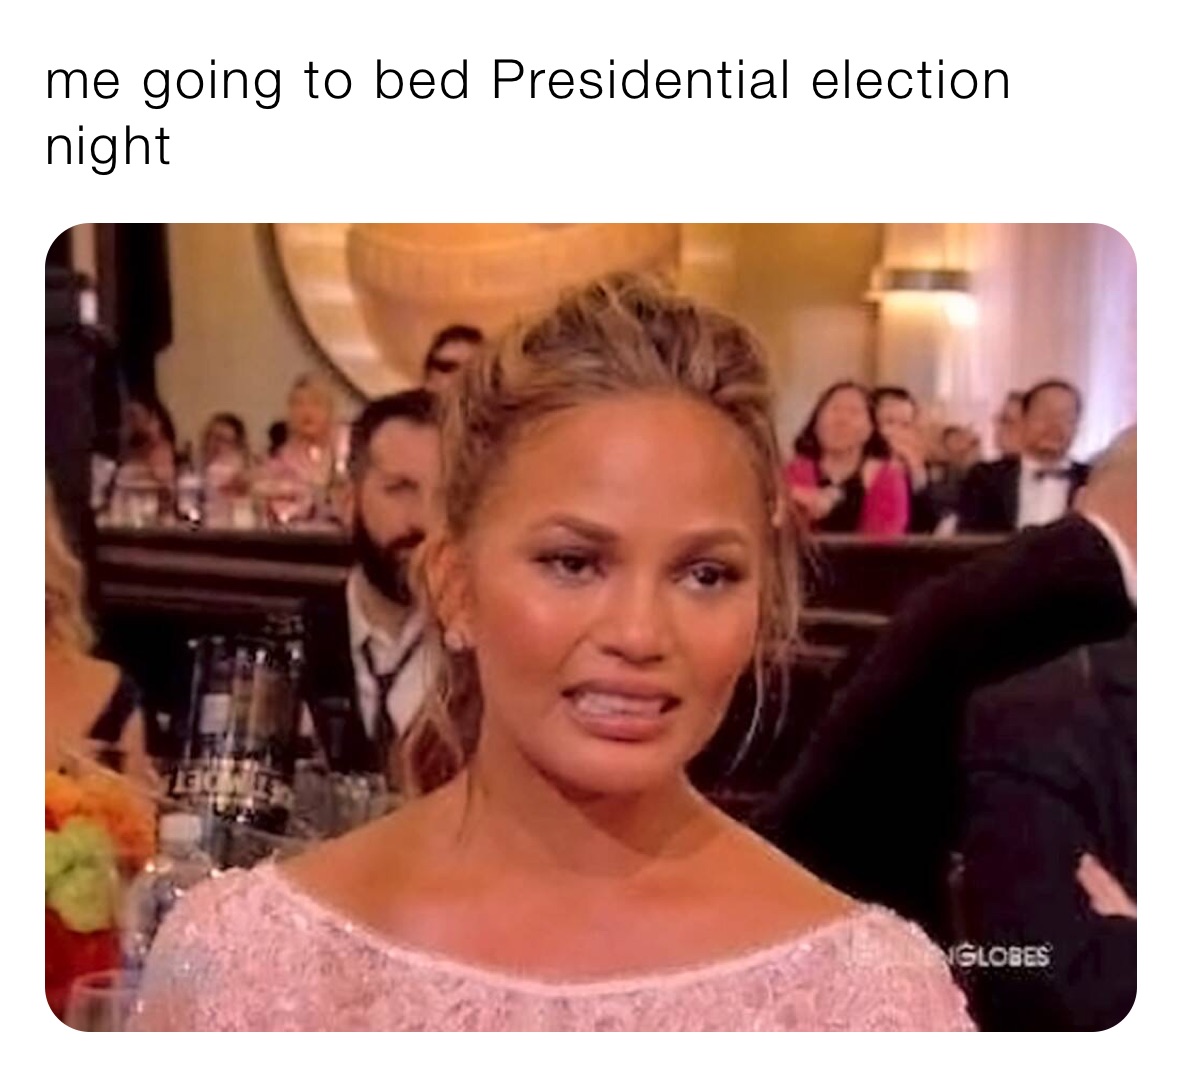 me going to bed Presidential election night